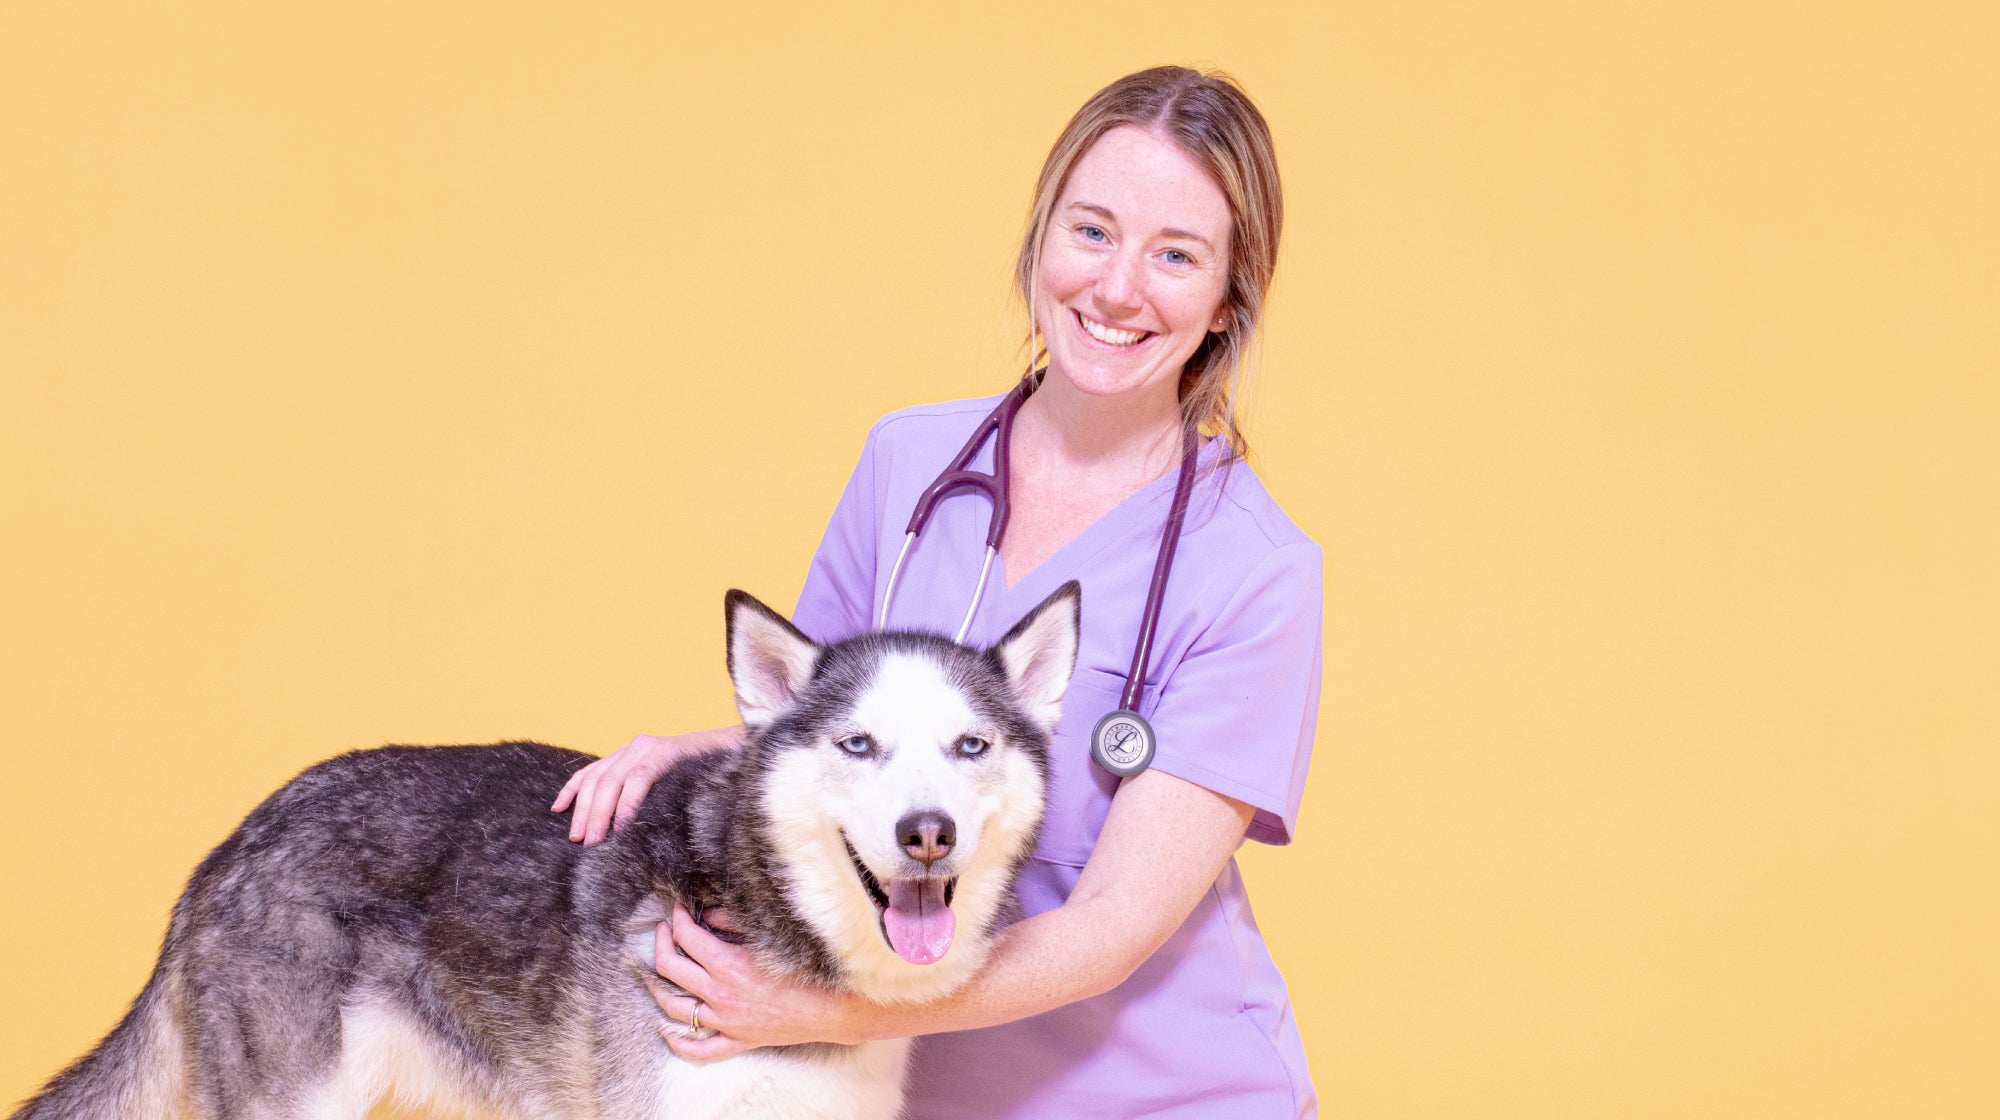 husky with a vet on a yellow background